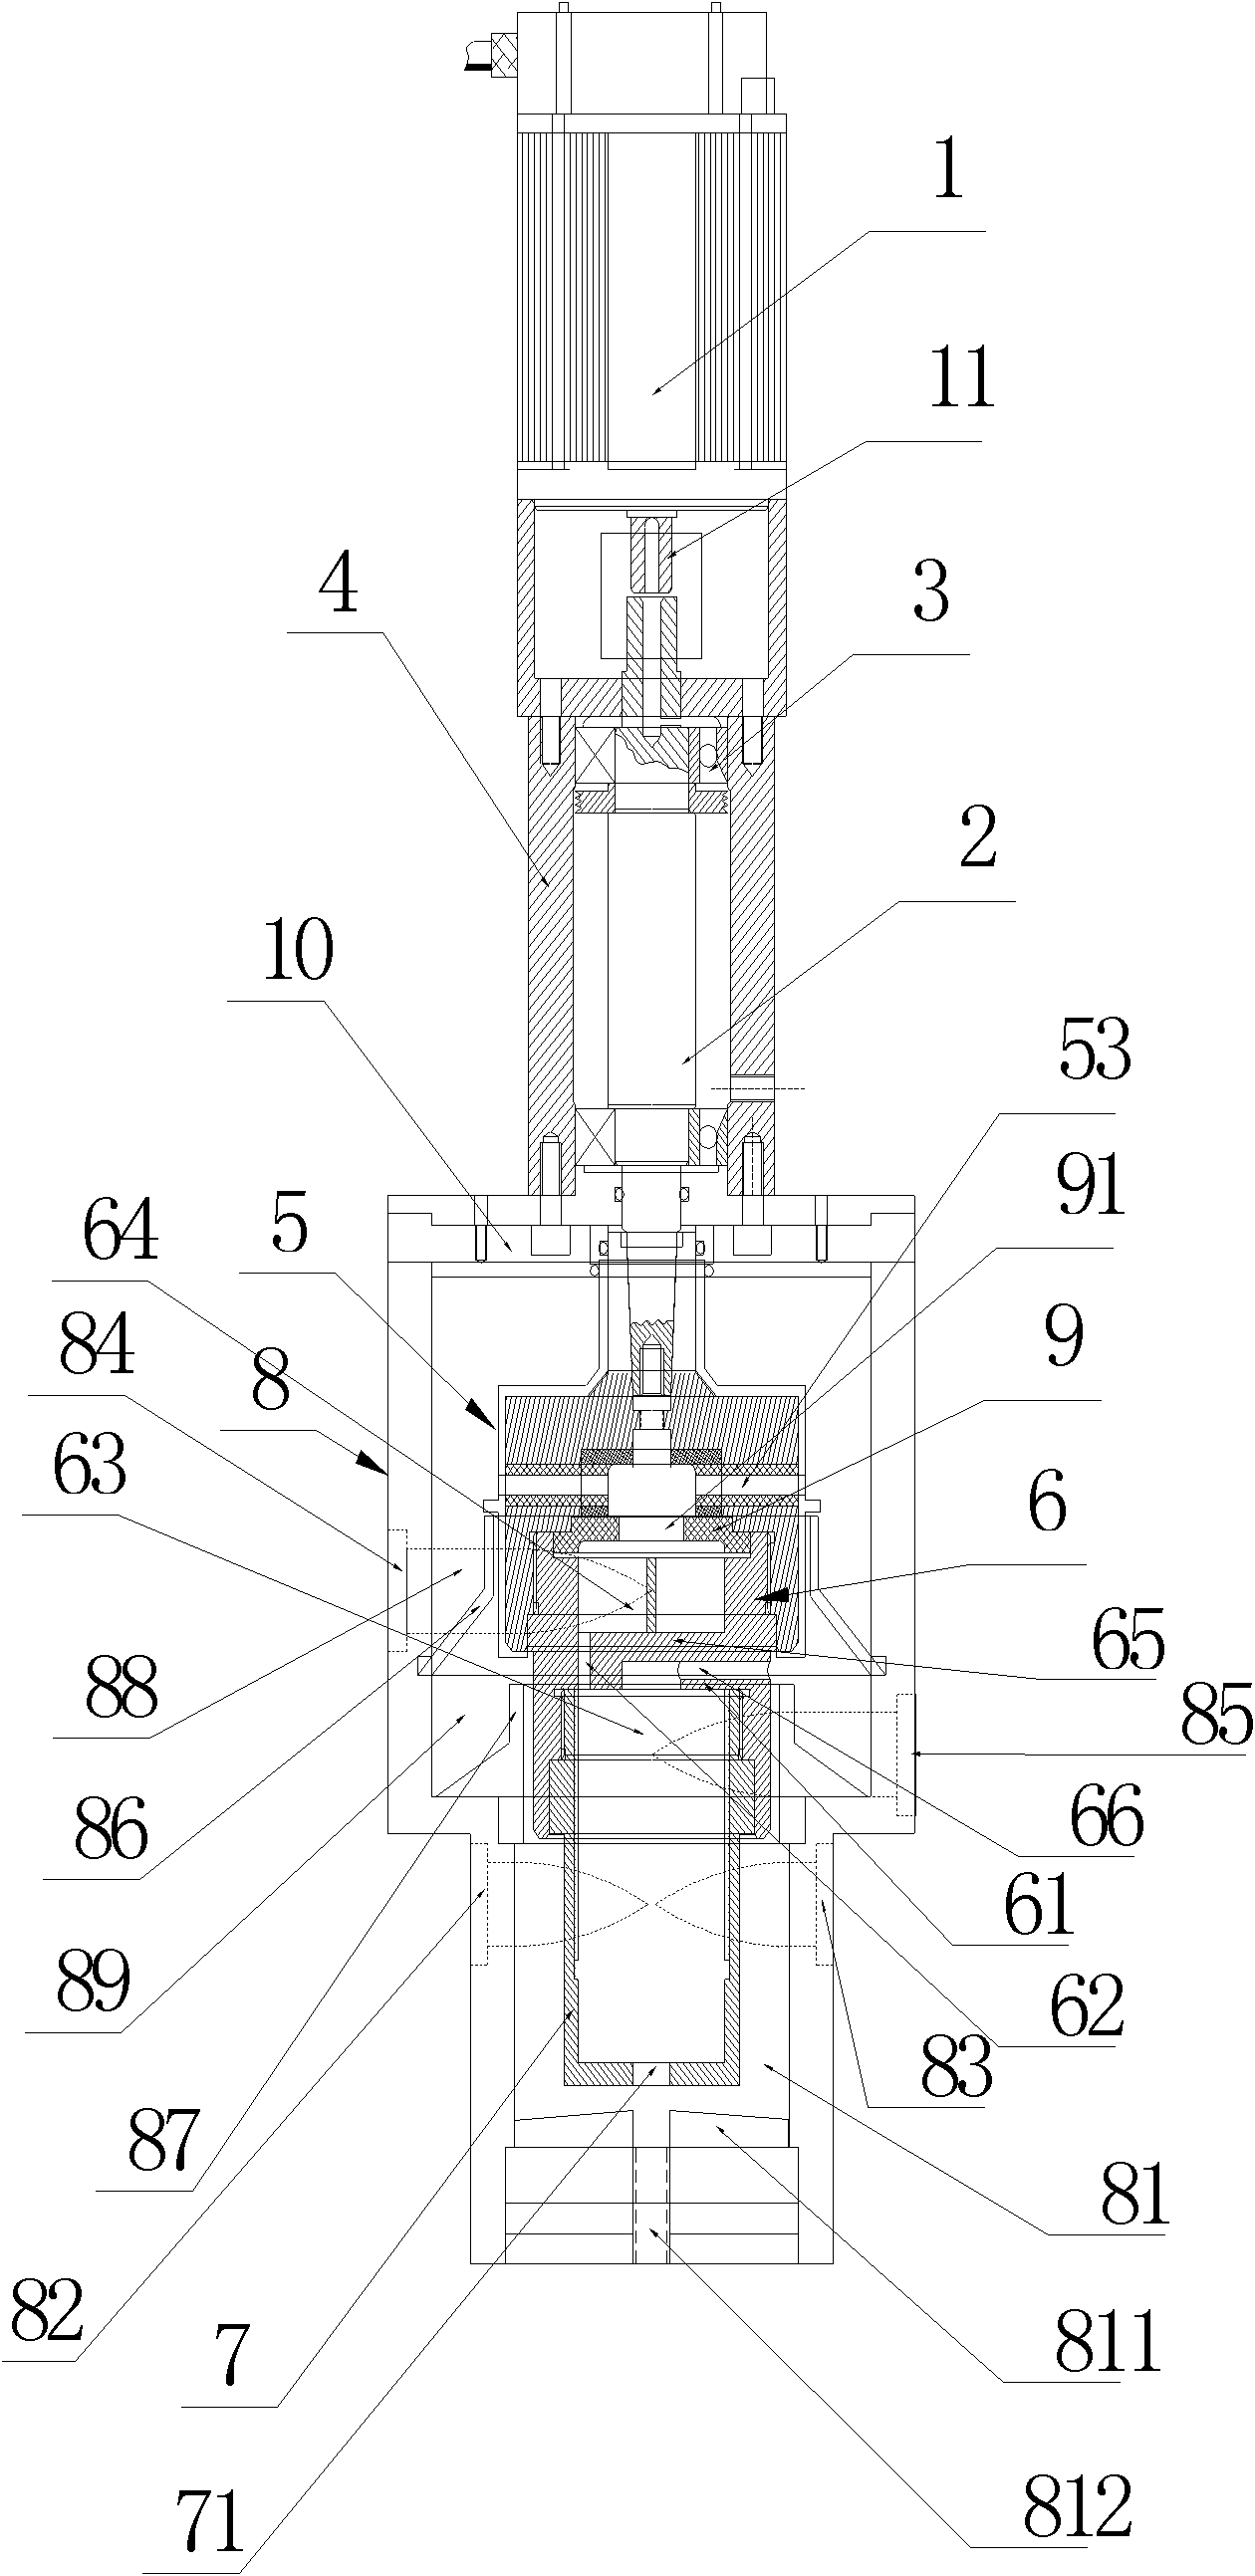 Centrifugal extractor